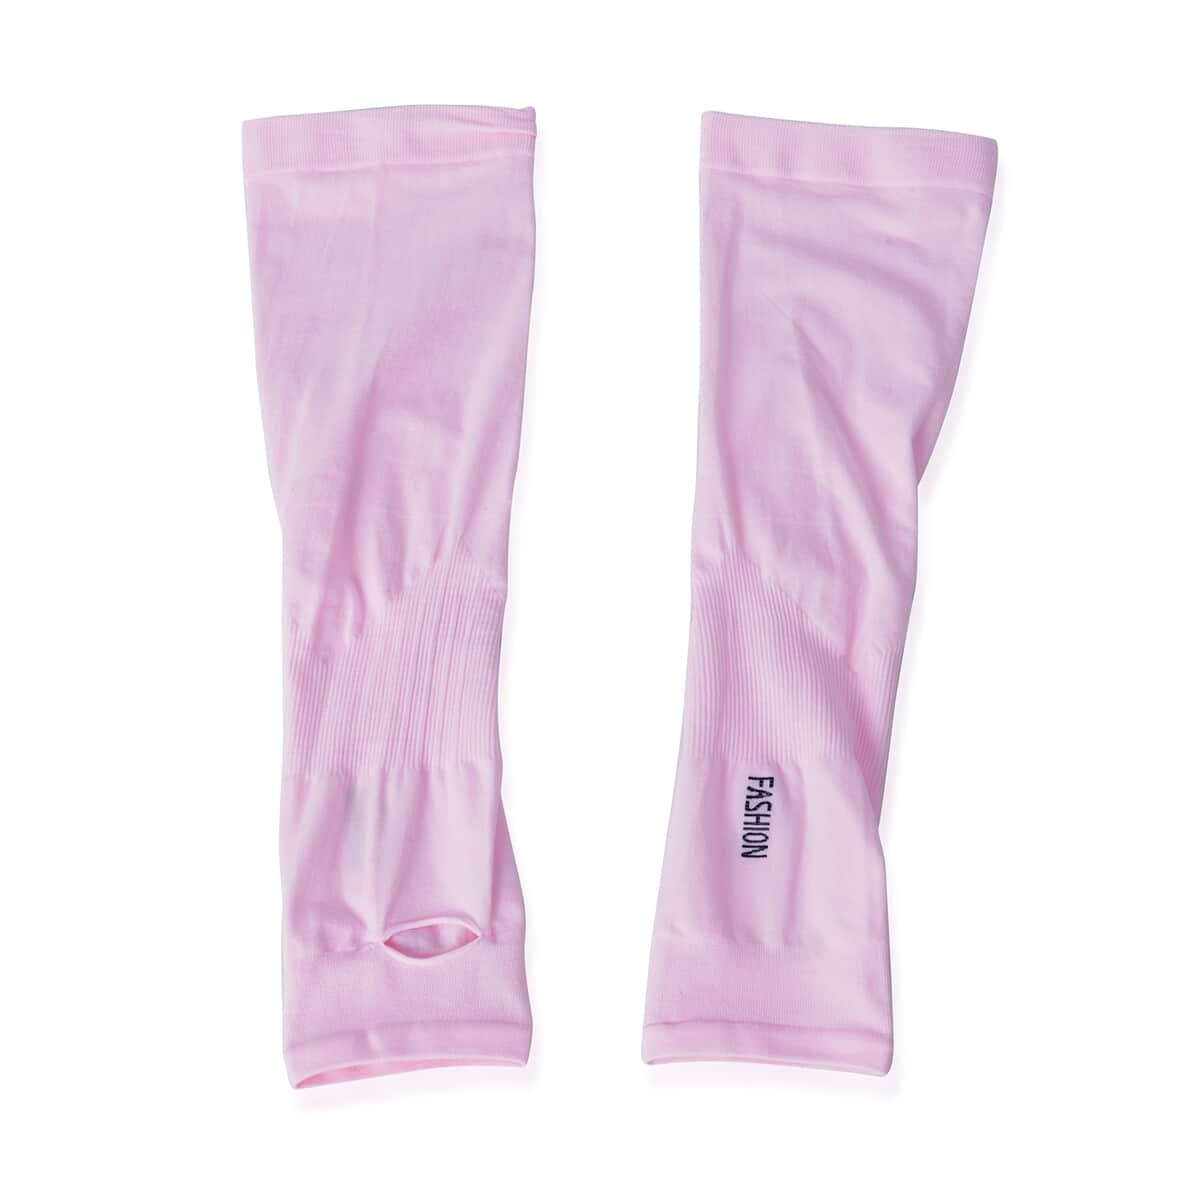 HOMESMART Set of 3 Pairs White, Lilac and Pink Cooling Sleeves (90% Polyamide and 10% Spandex) image number 6